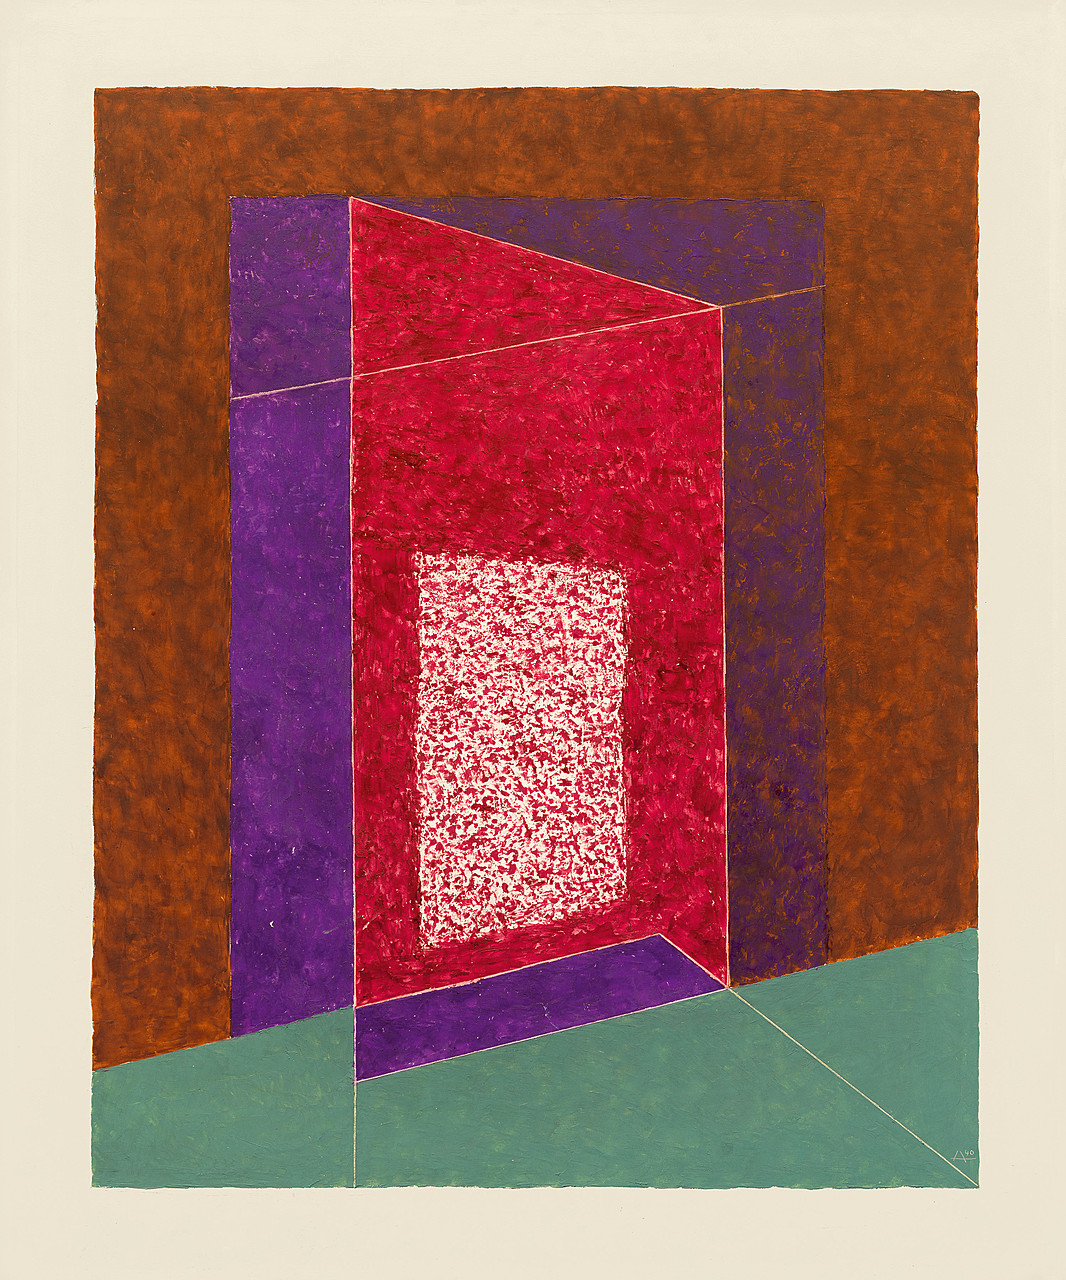 Josef Albers | Concealing | The Guggenheim Museums and Foundation